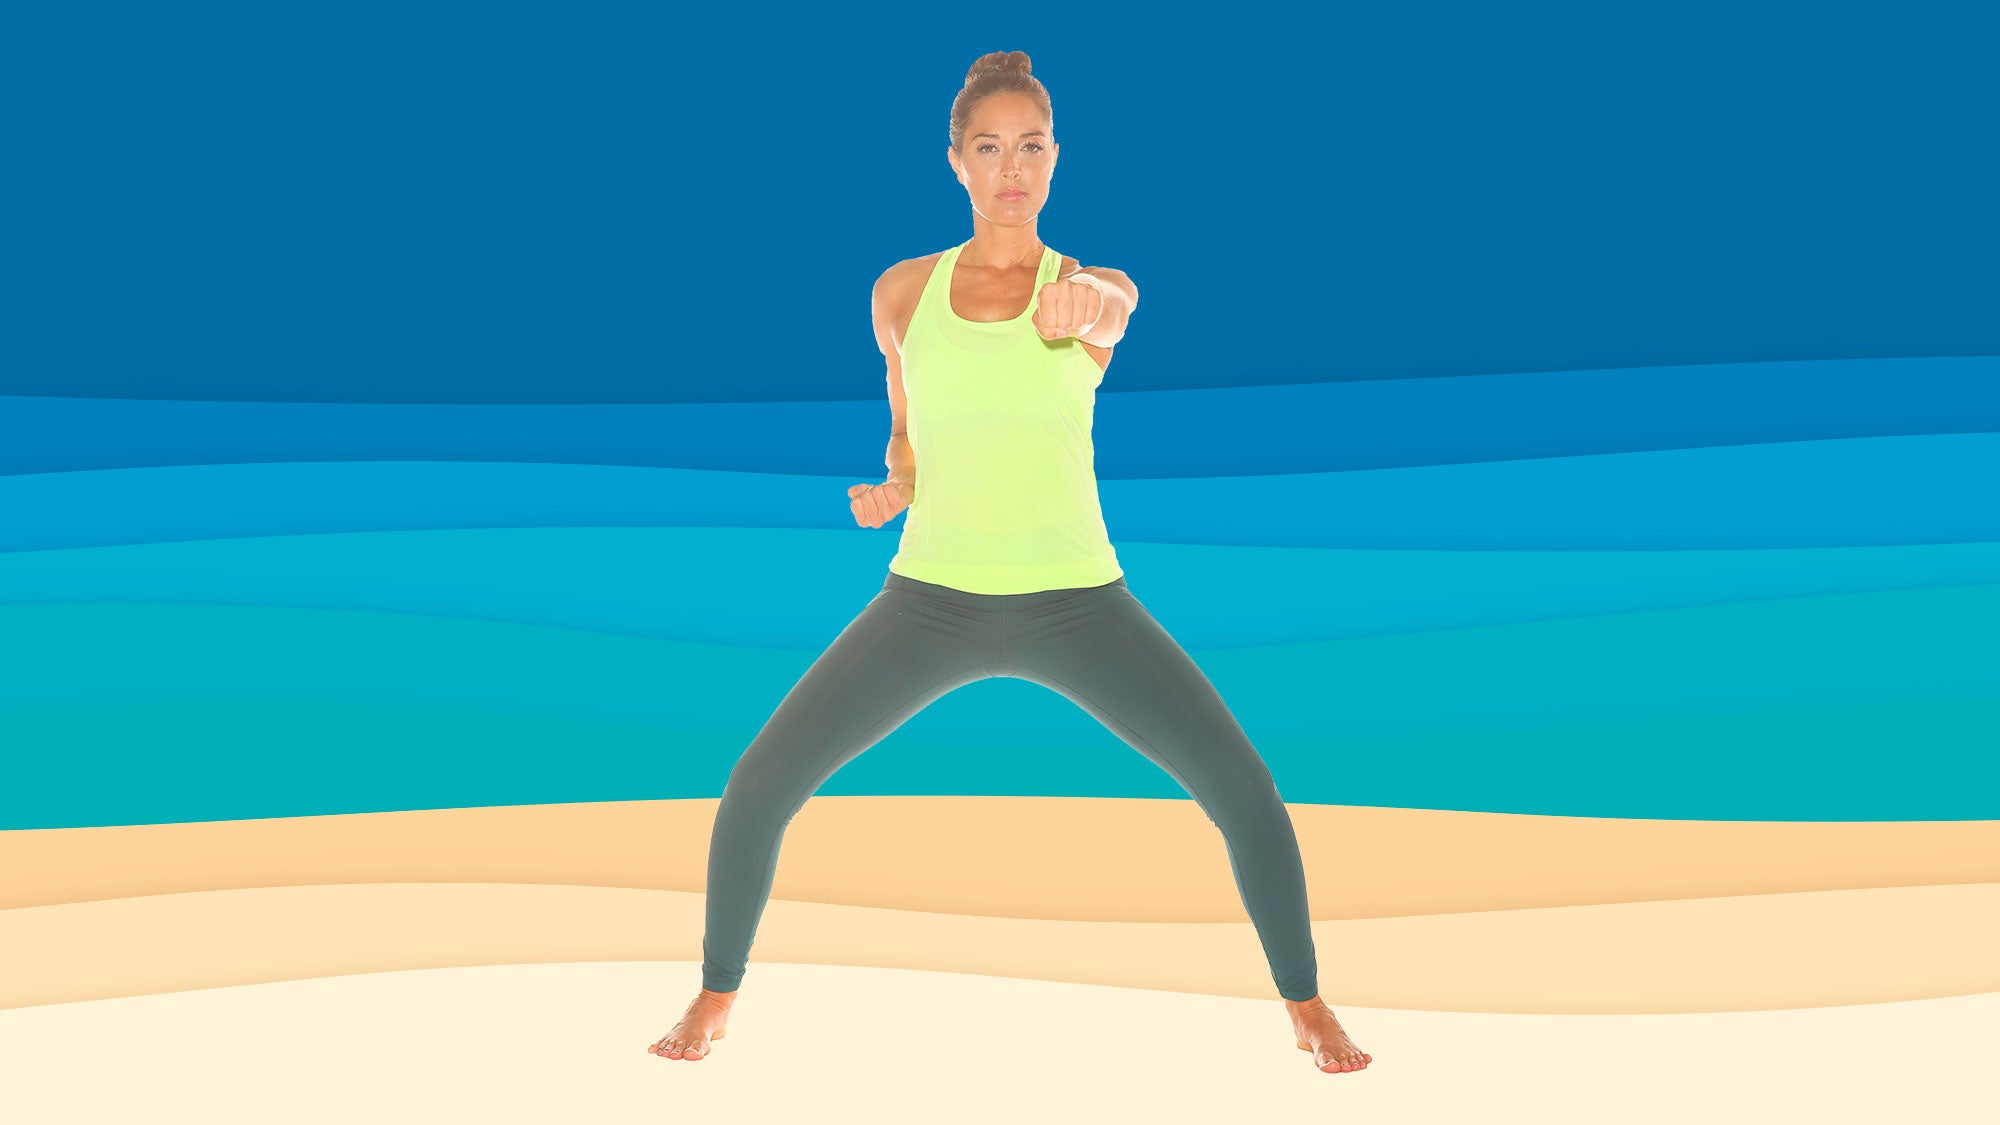 Yoga for Anger Release - A Yoga Sequence for Emotional Release - YouTube